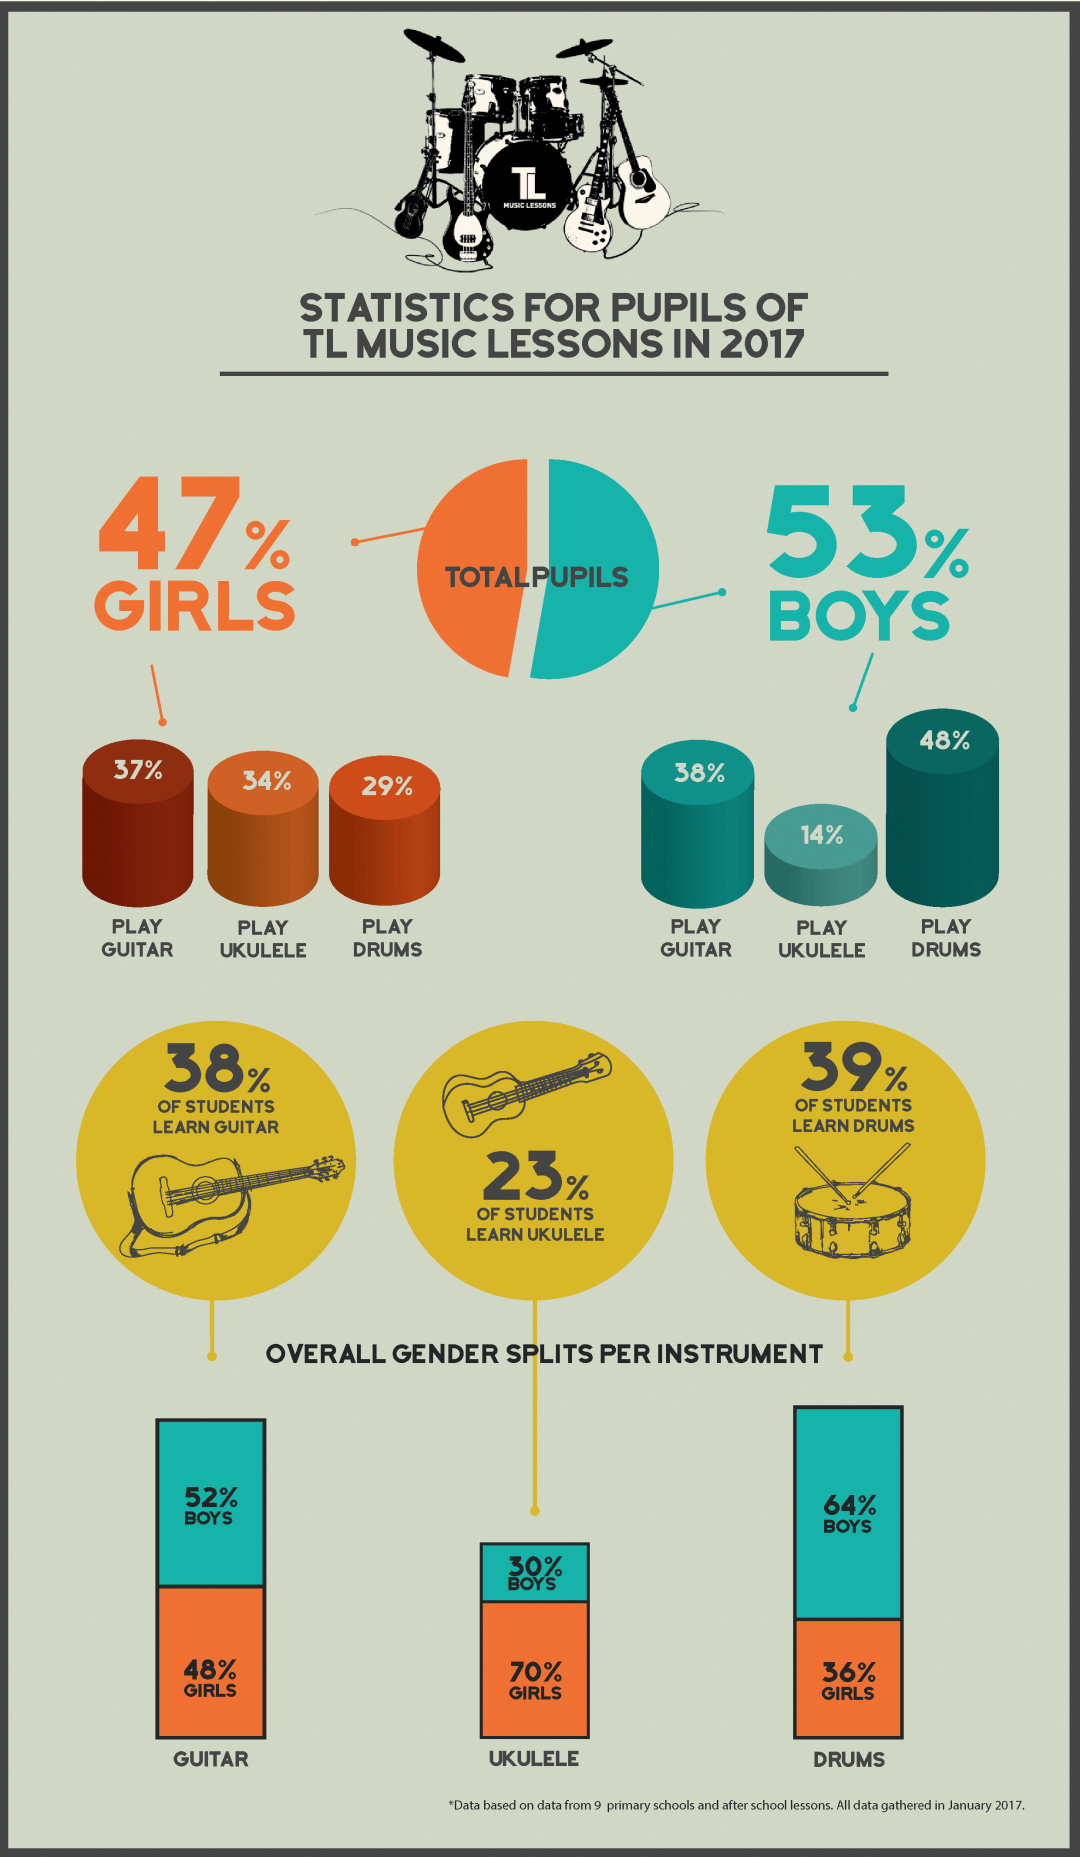 INFOGRAPHIC – Girls vs Boys stats for Guitar, Ukulele, Drums – TL Music Lessons 2017